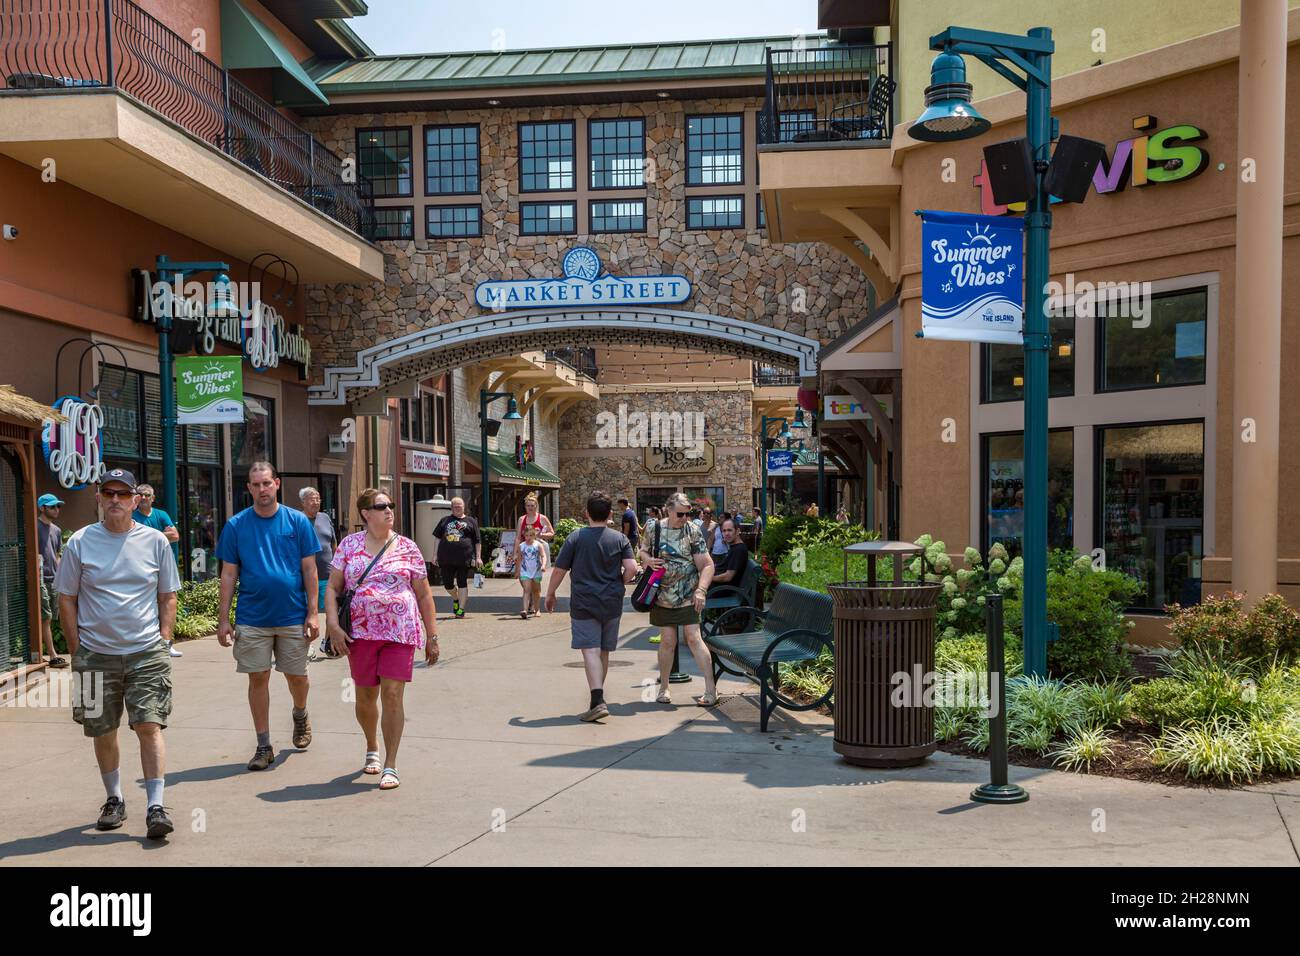 Market Street sign leads tourists to the shopping area at The Island recreation center in Pigeon Forge, Tennessee Stock Photo